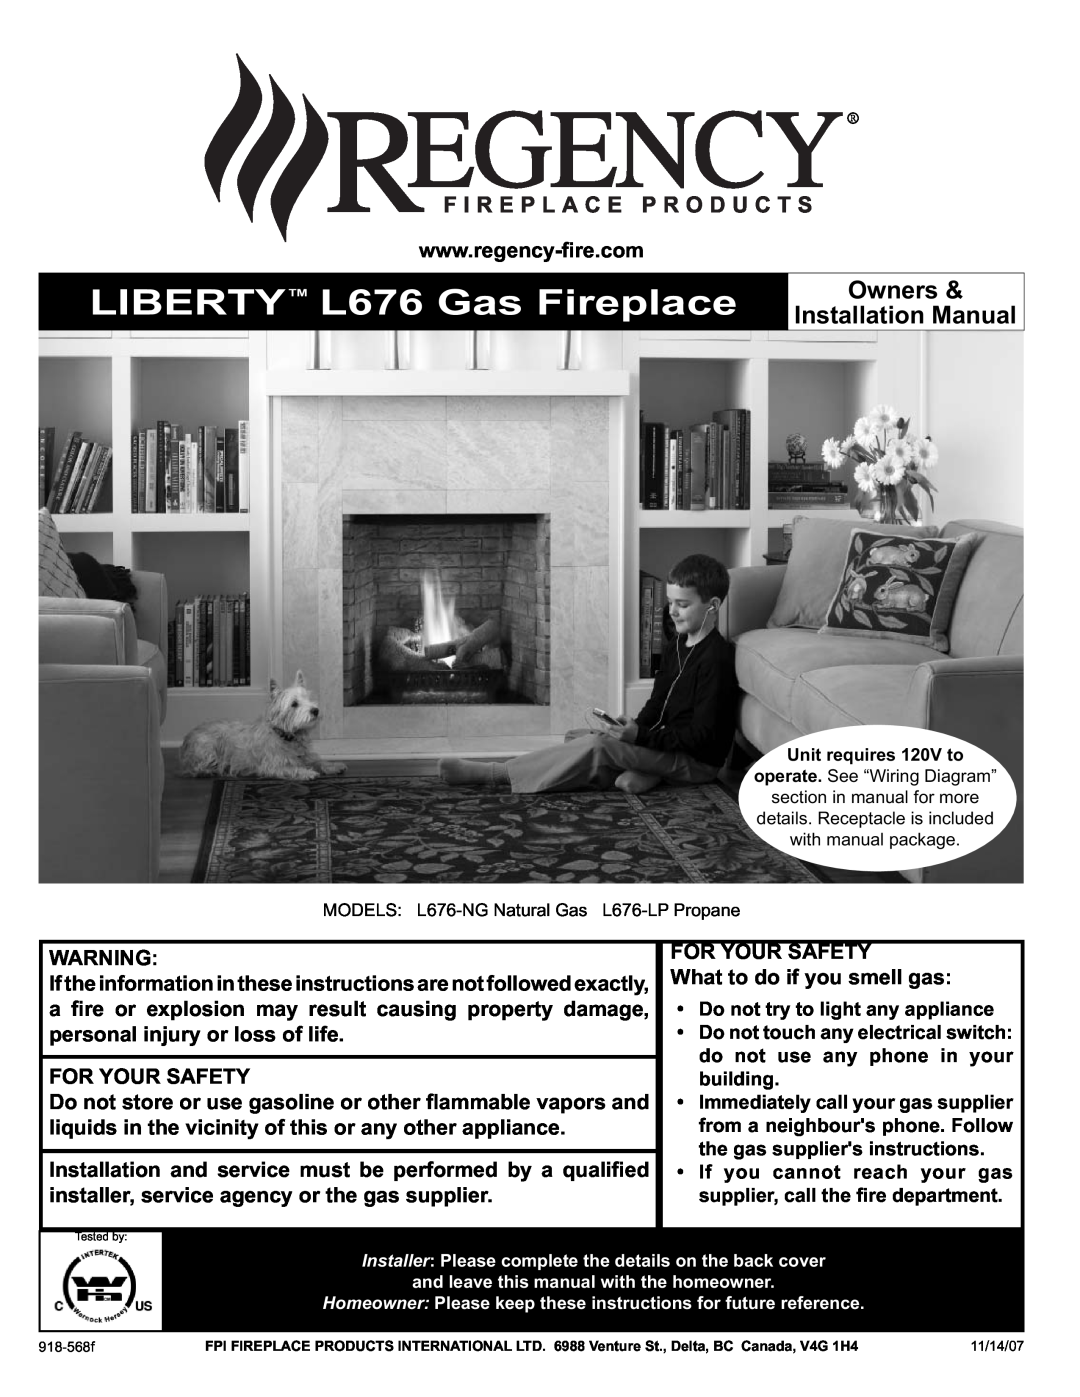 Regency installation manual LIBERTYTM L676 Gas Fireplace, Owners & Installation Manual 